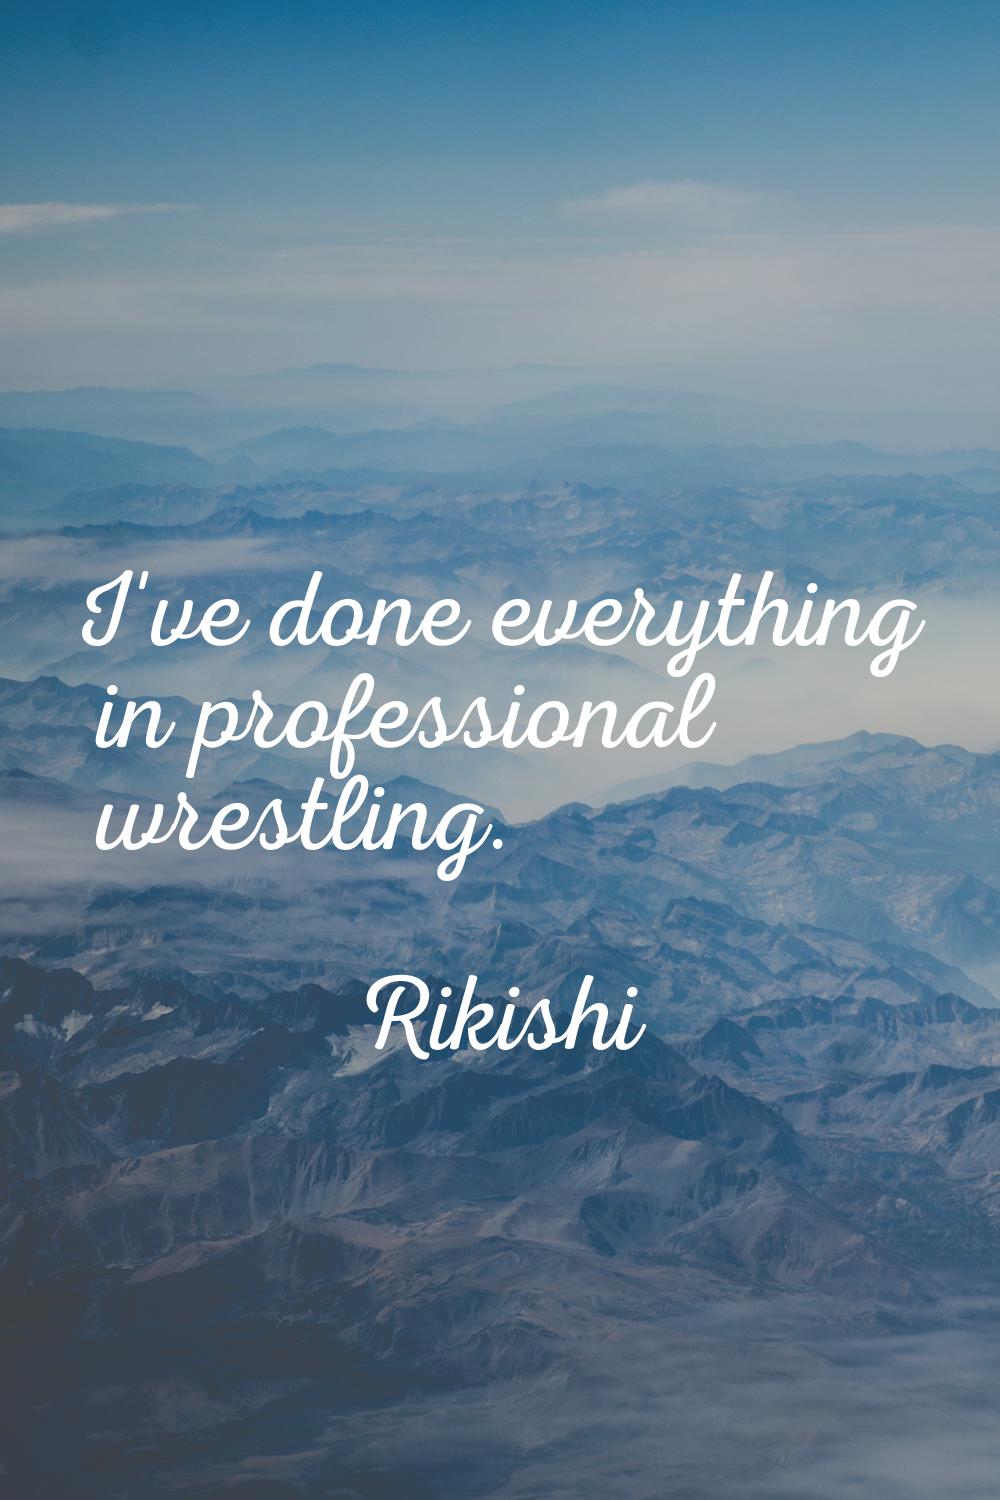 I've done everything in professional wrestling.